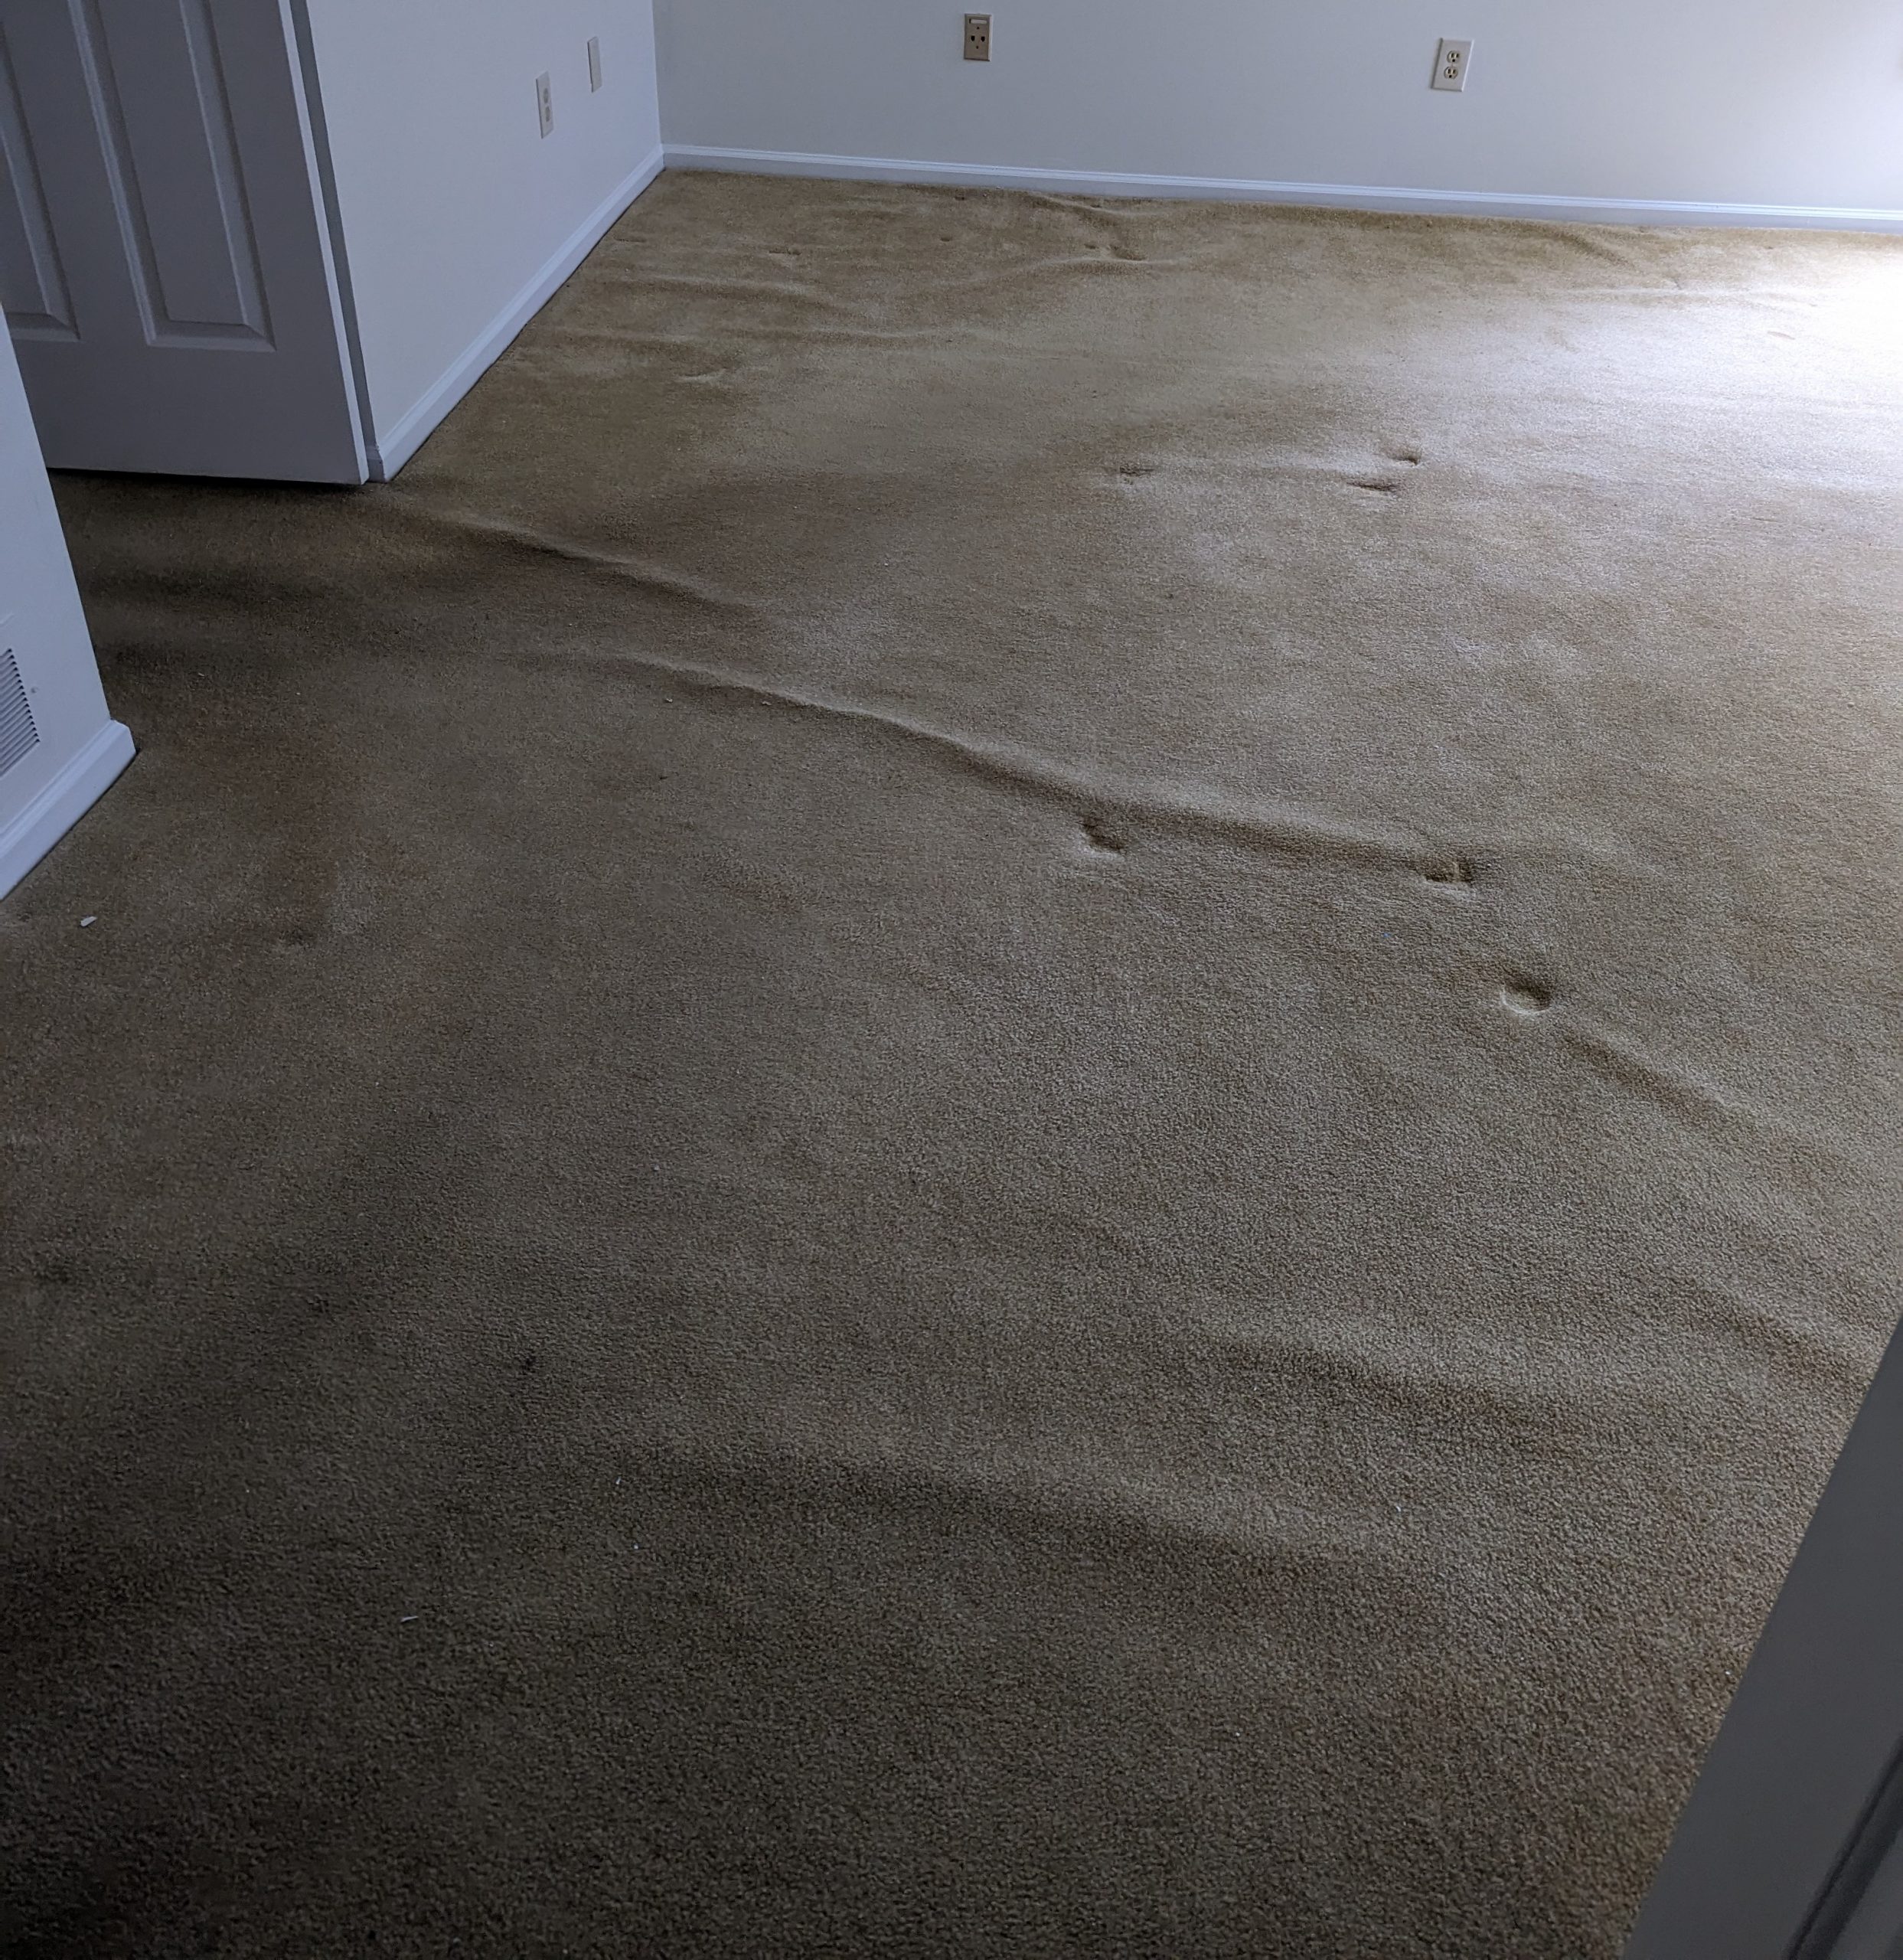 Carpet with wrinkles before stretching